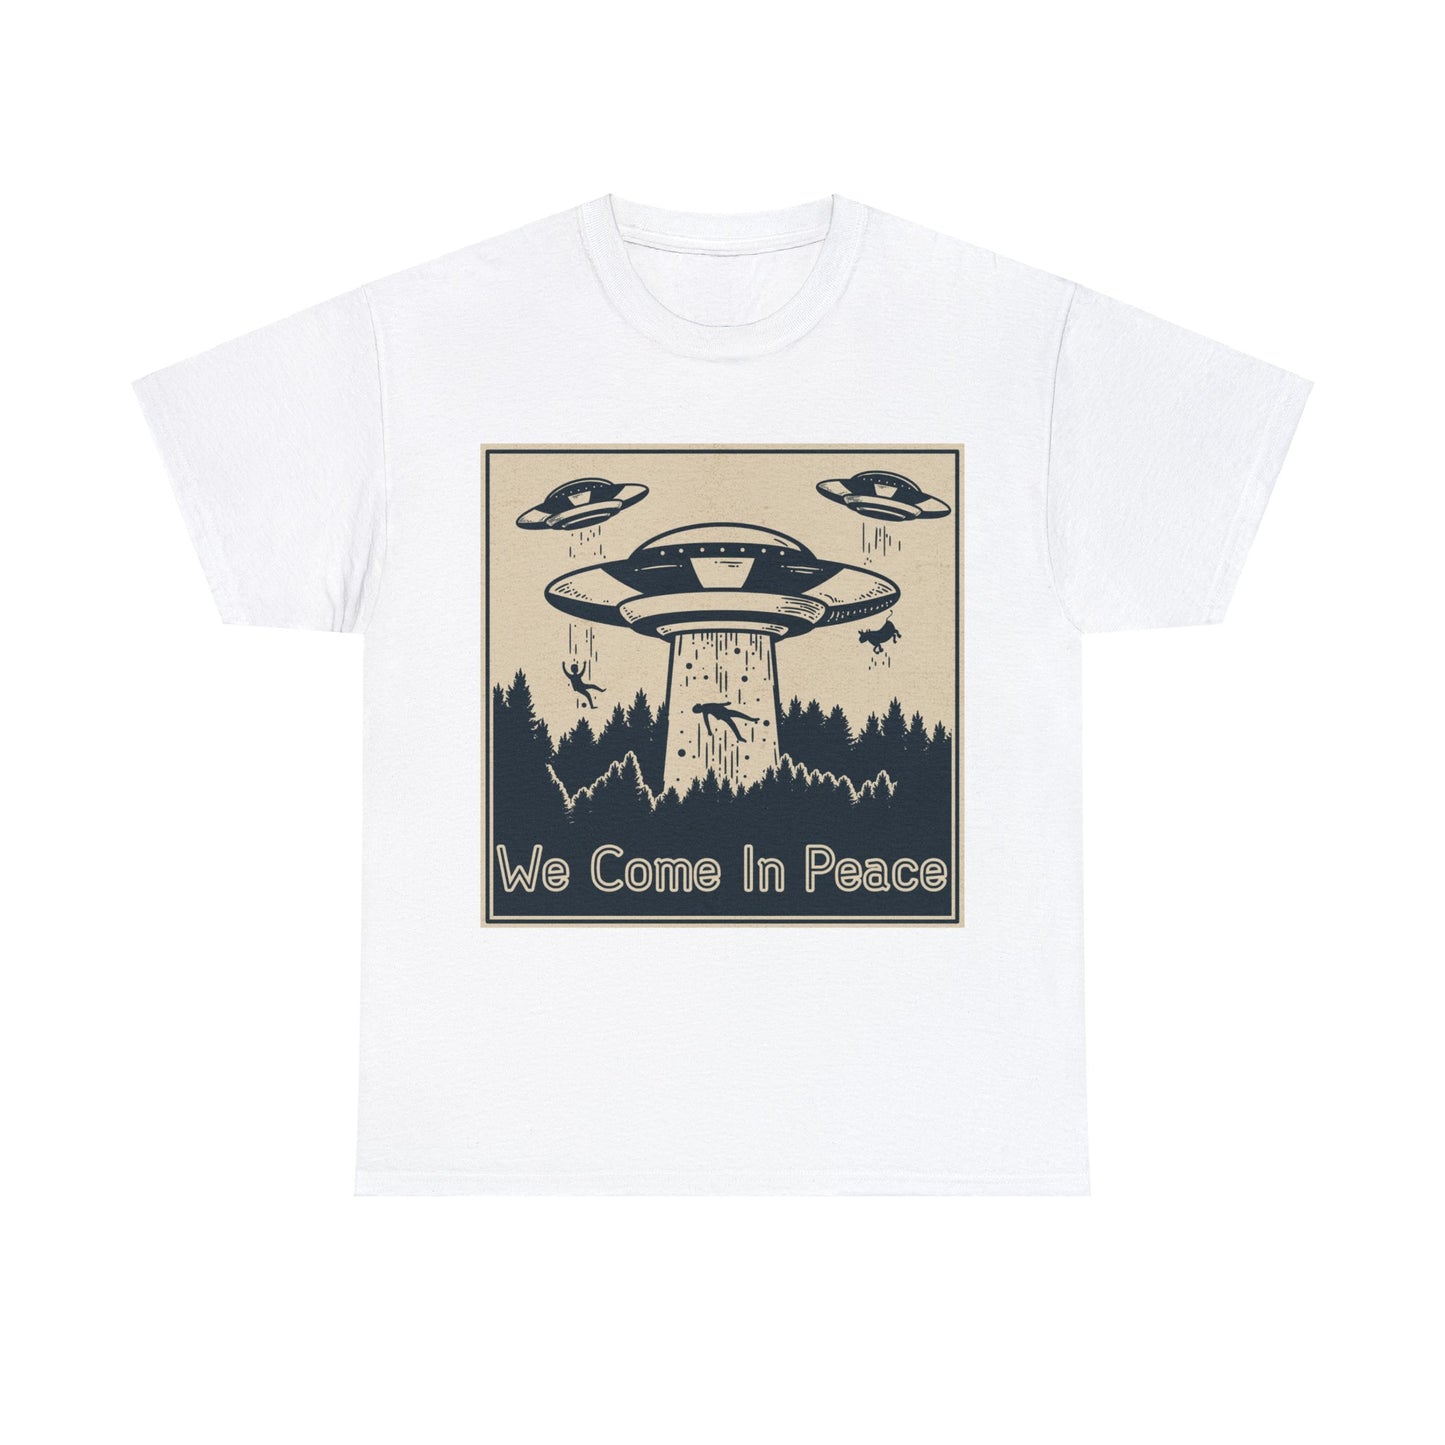 We Come In Peace Alien Abduction Funny Designer Graphic Tee